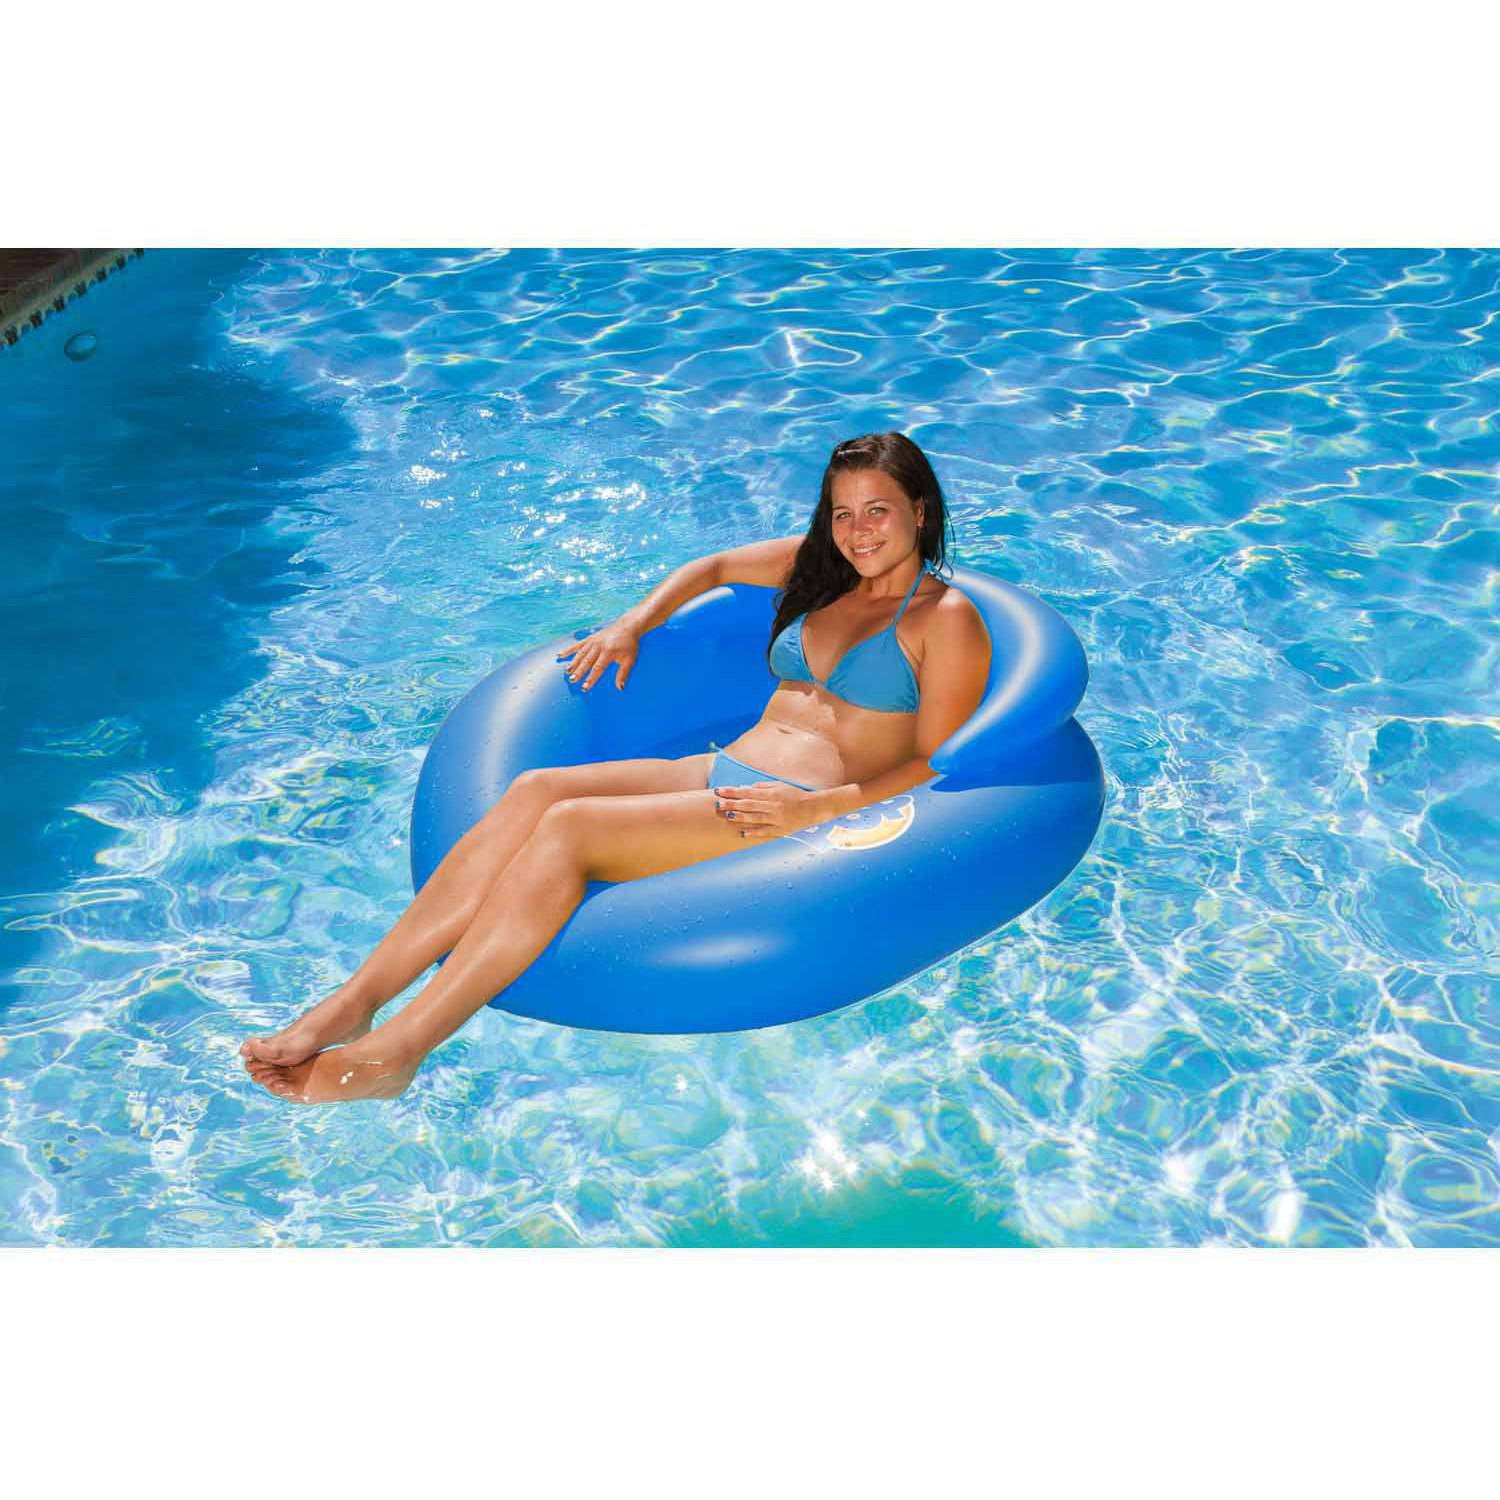 NEW Original ItzaTube Large 36-Inch Inflatable Inner Tube Water Sports 80070-1 